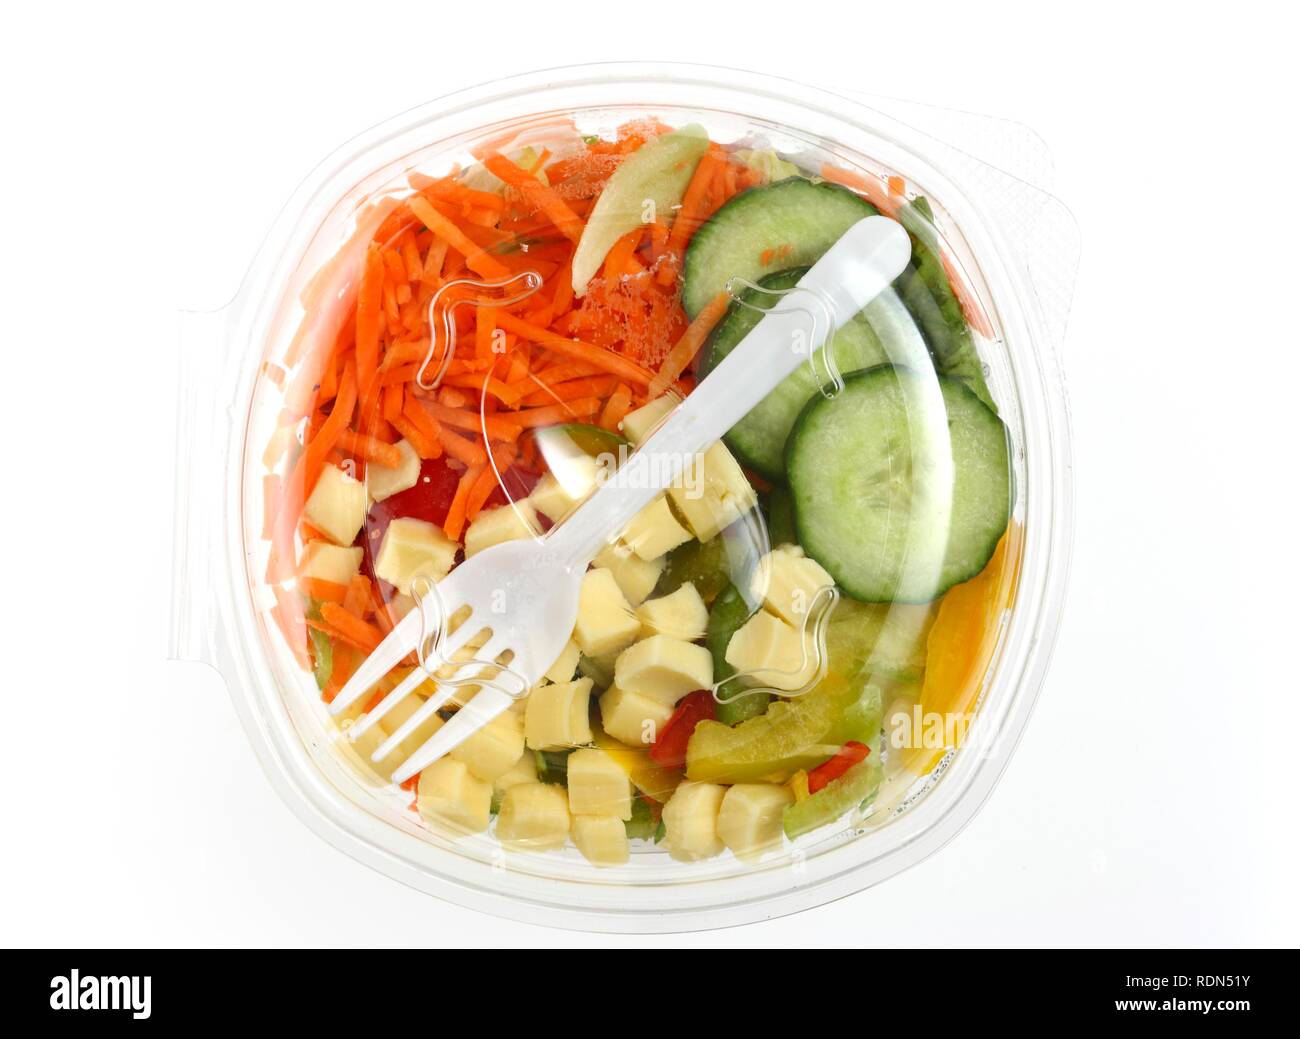 Mixed salad, packed, for immediate consumption Stock Photo